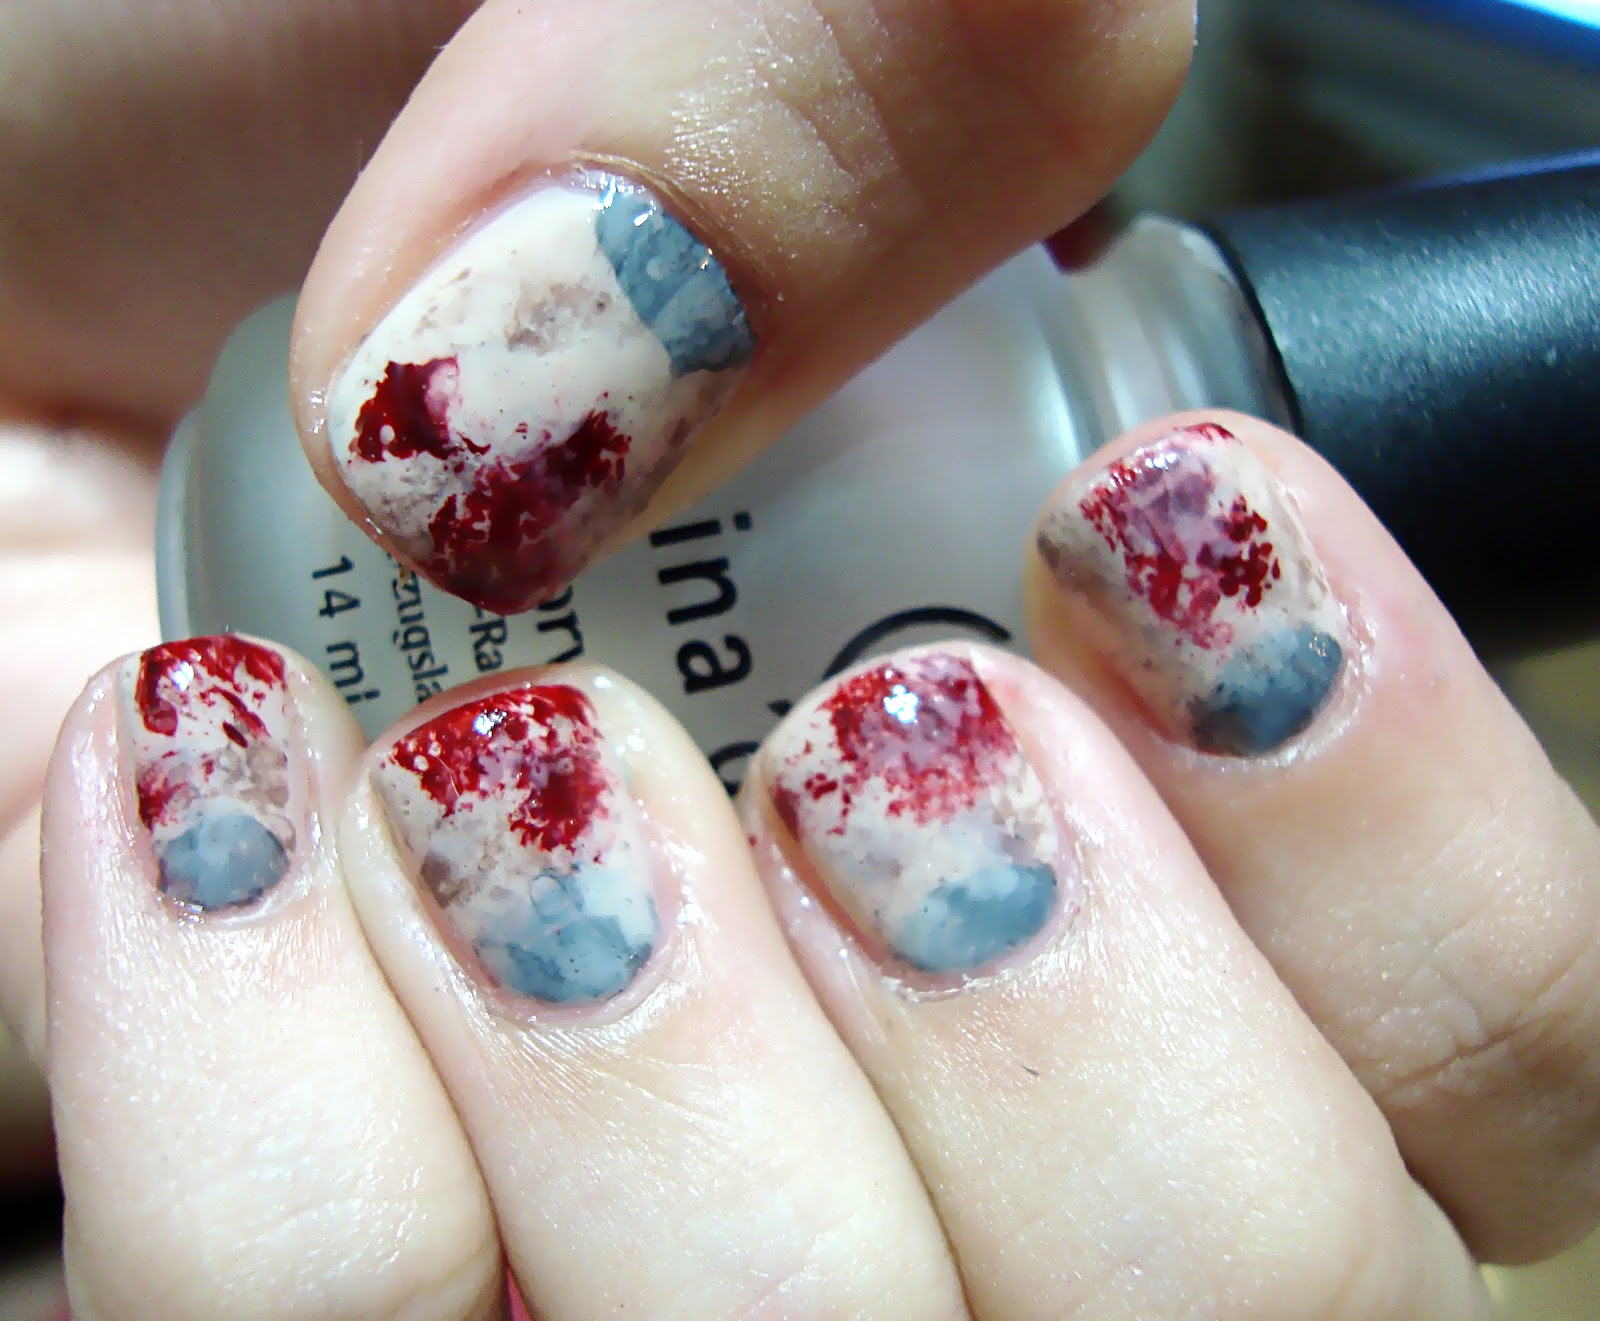 2. "Zombie nail art designs" - wide 5